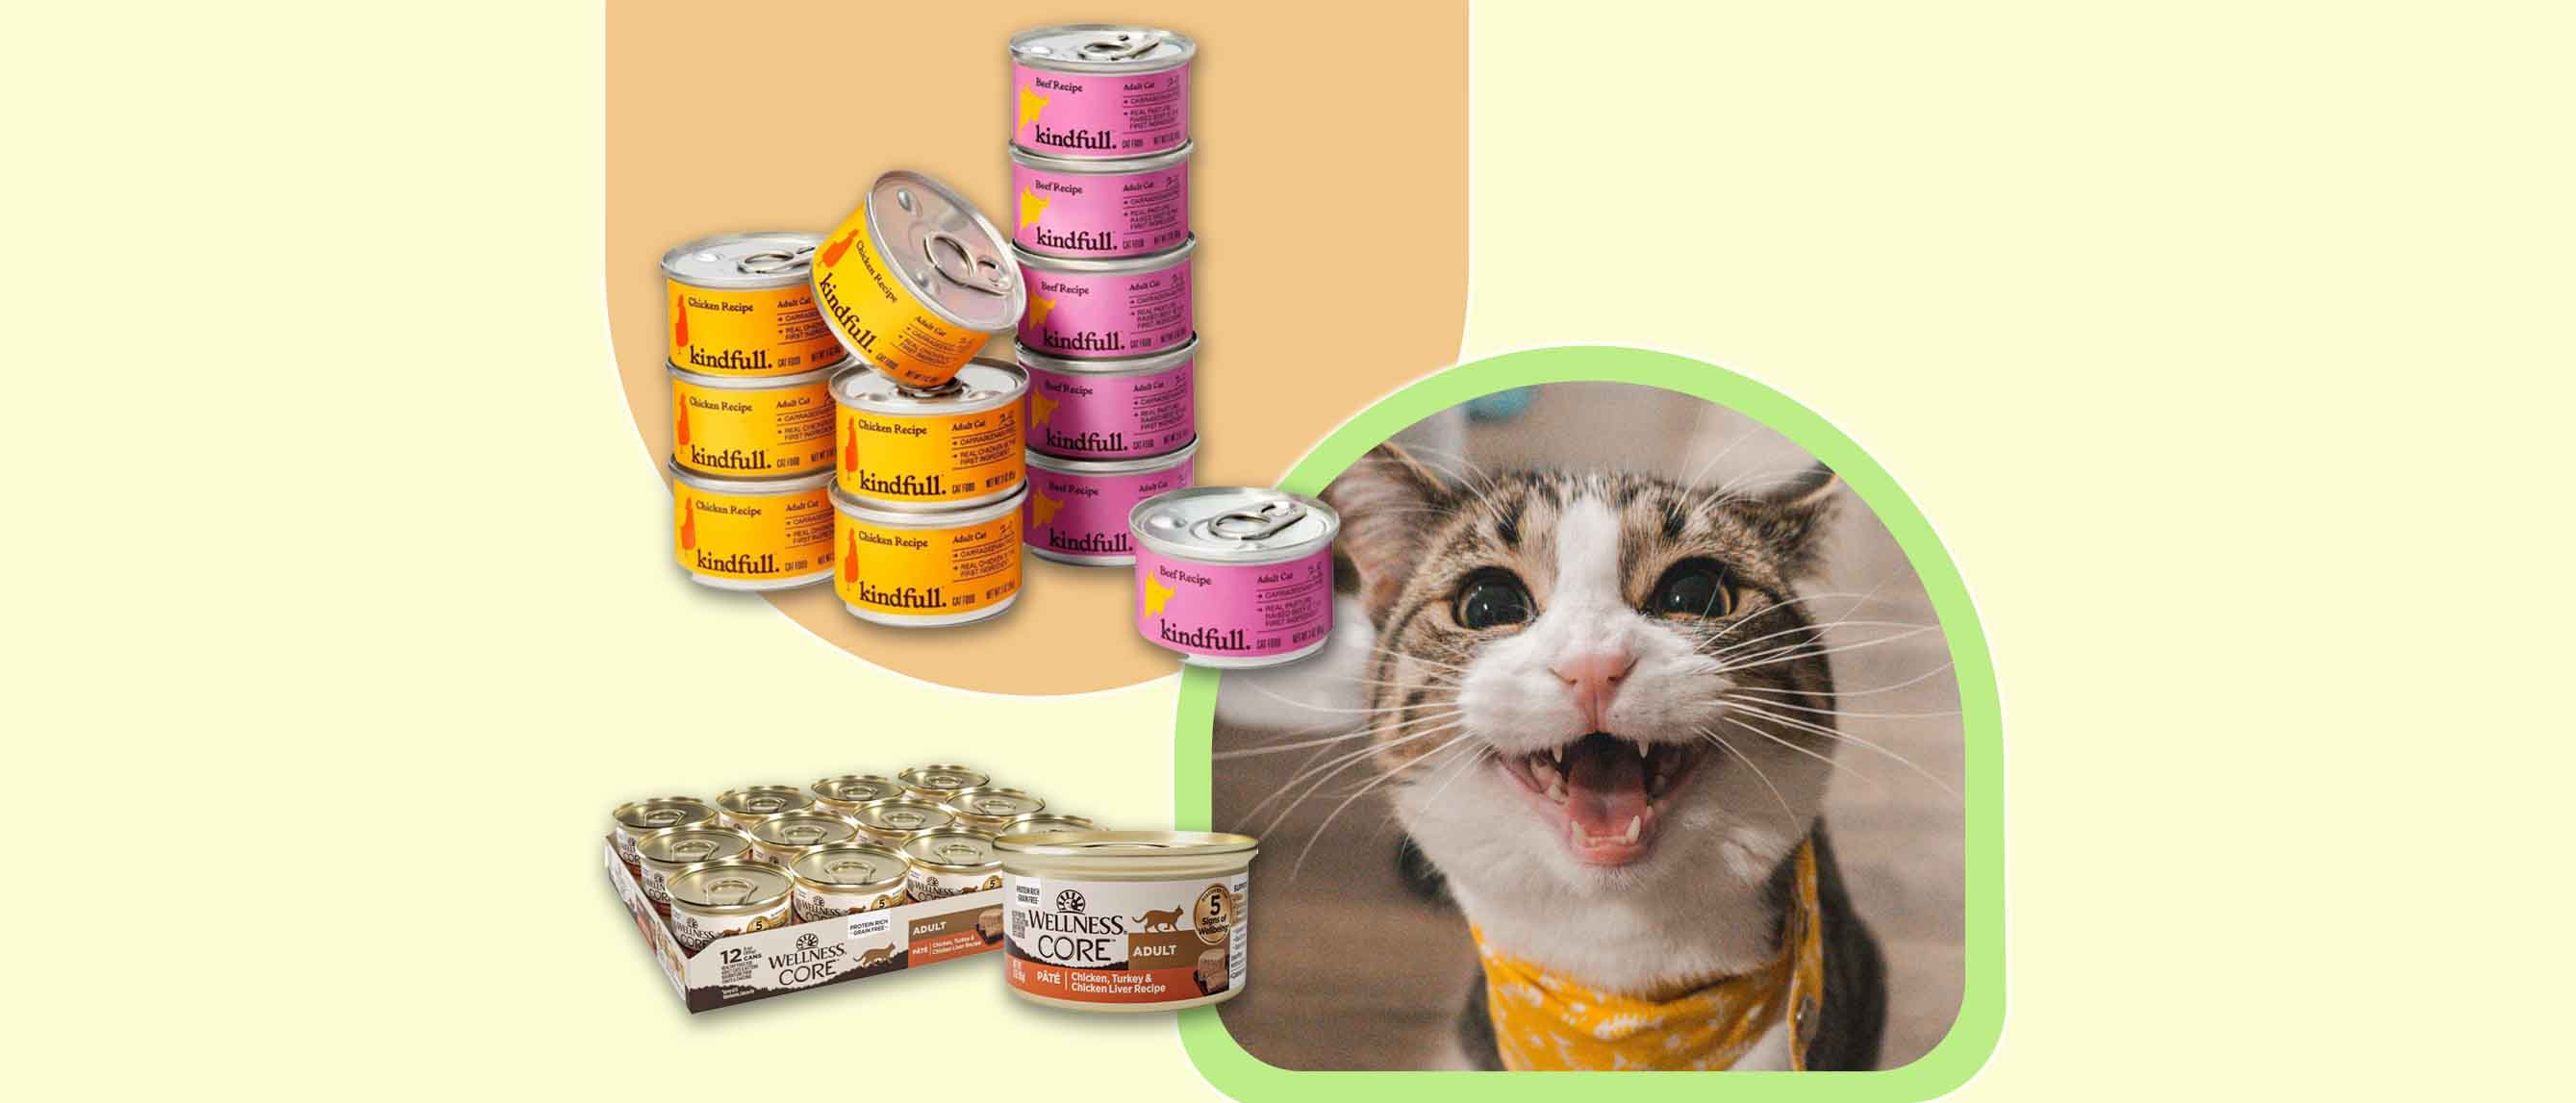 Image of two types of wet cat food and a cat